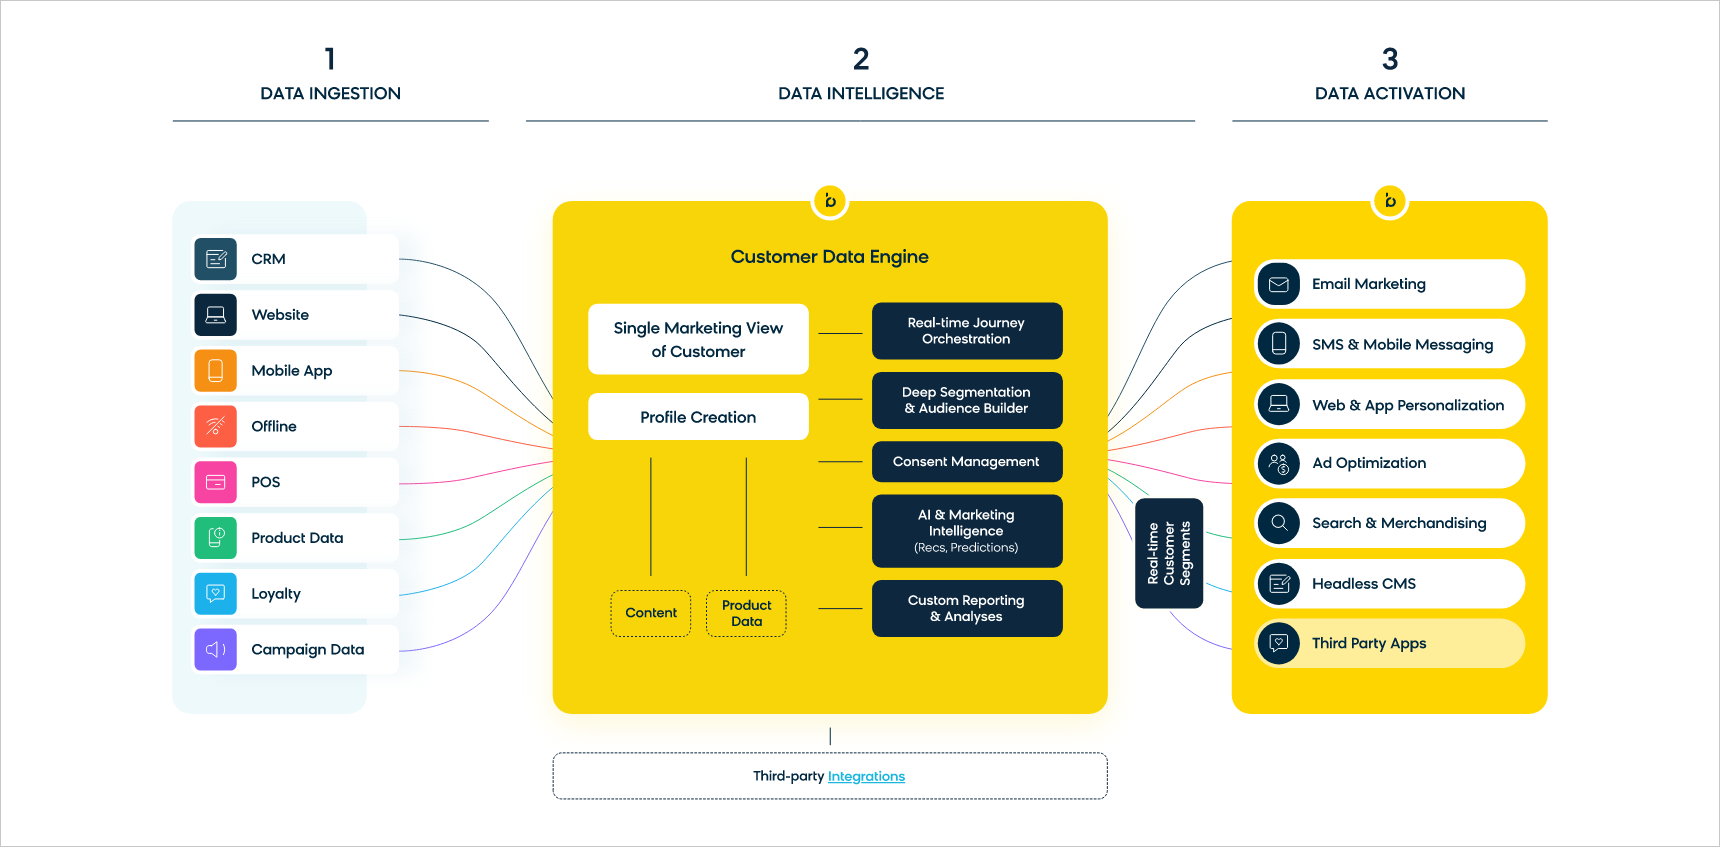 Bloomreach Engagement natively connects advanced data collection capabilities with granular analytics to help marketers understand the customer journey in real time and create omnichannel campaigns